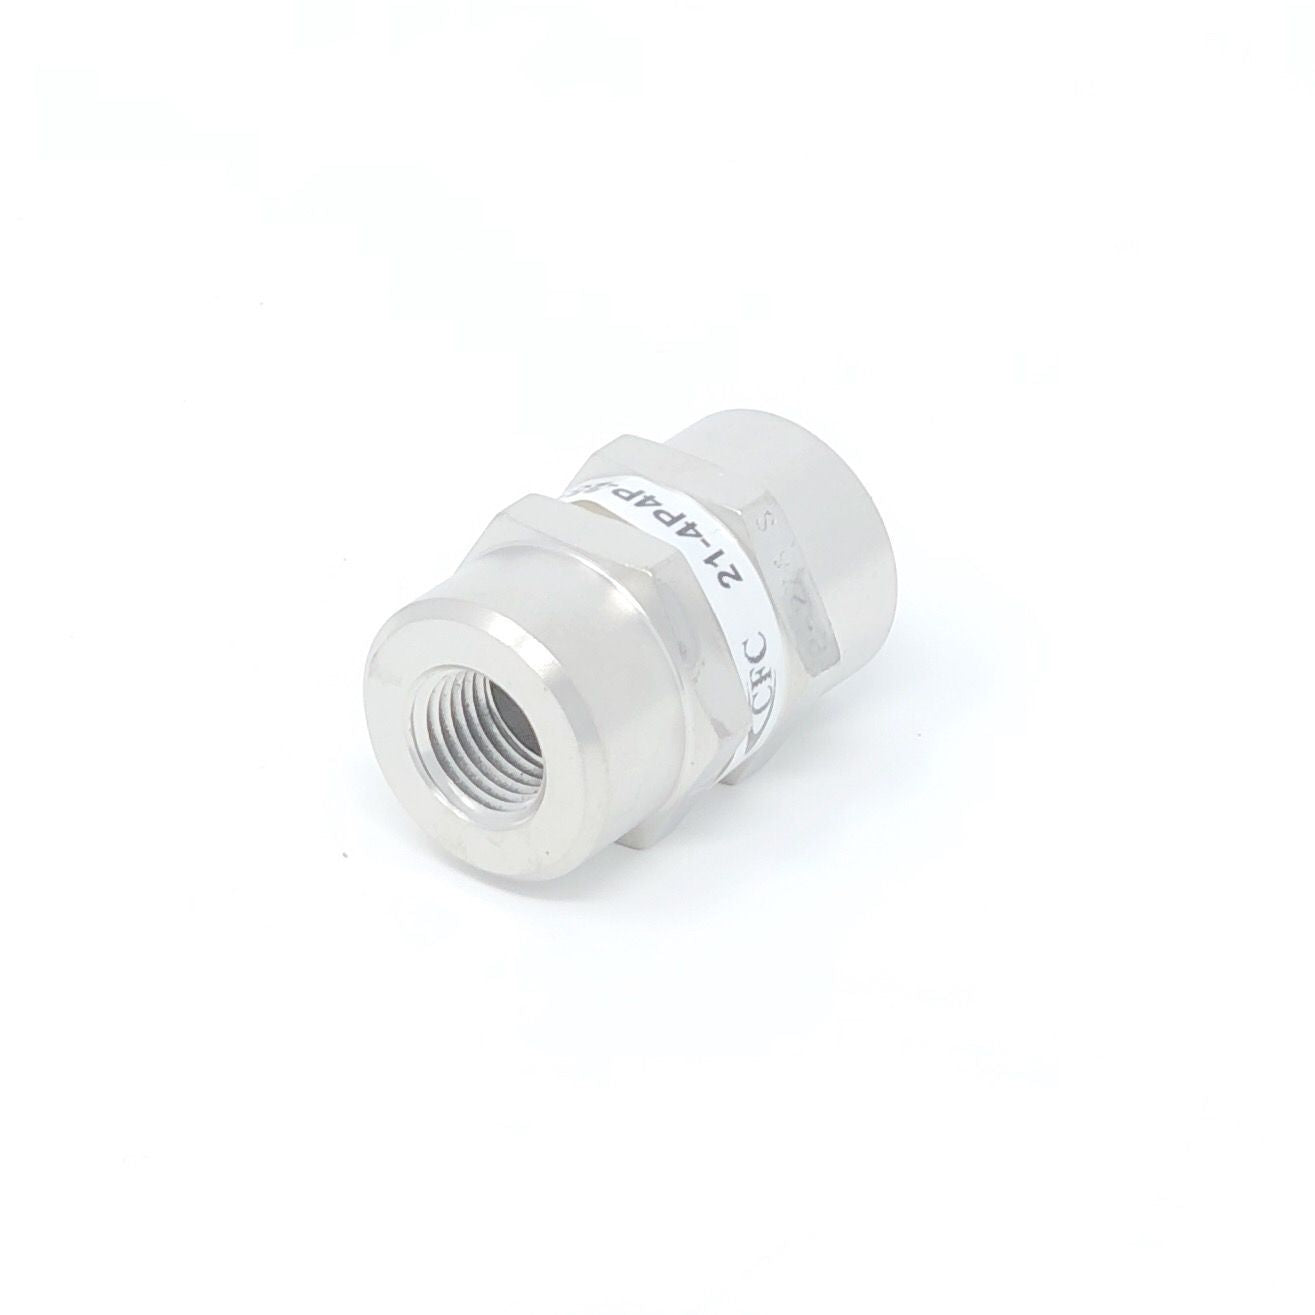 21-8M8M-10S : Chase High Pressure Inline Filter, 3000psi, #8 SAE (1/2"), 10 Micron, No Visual Indicator, With Bypass